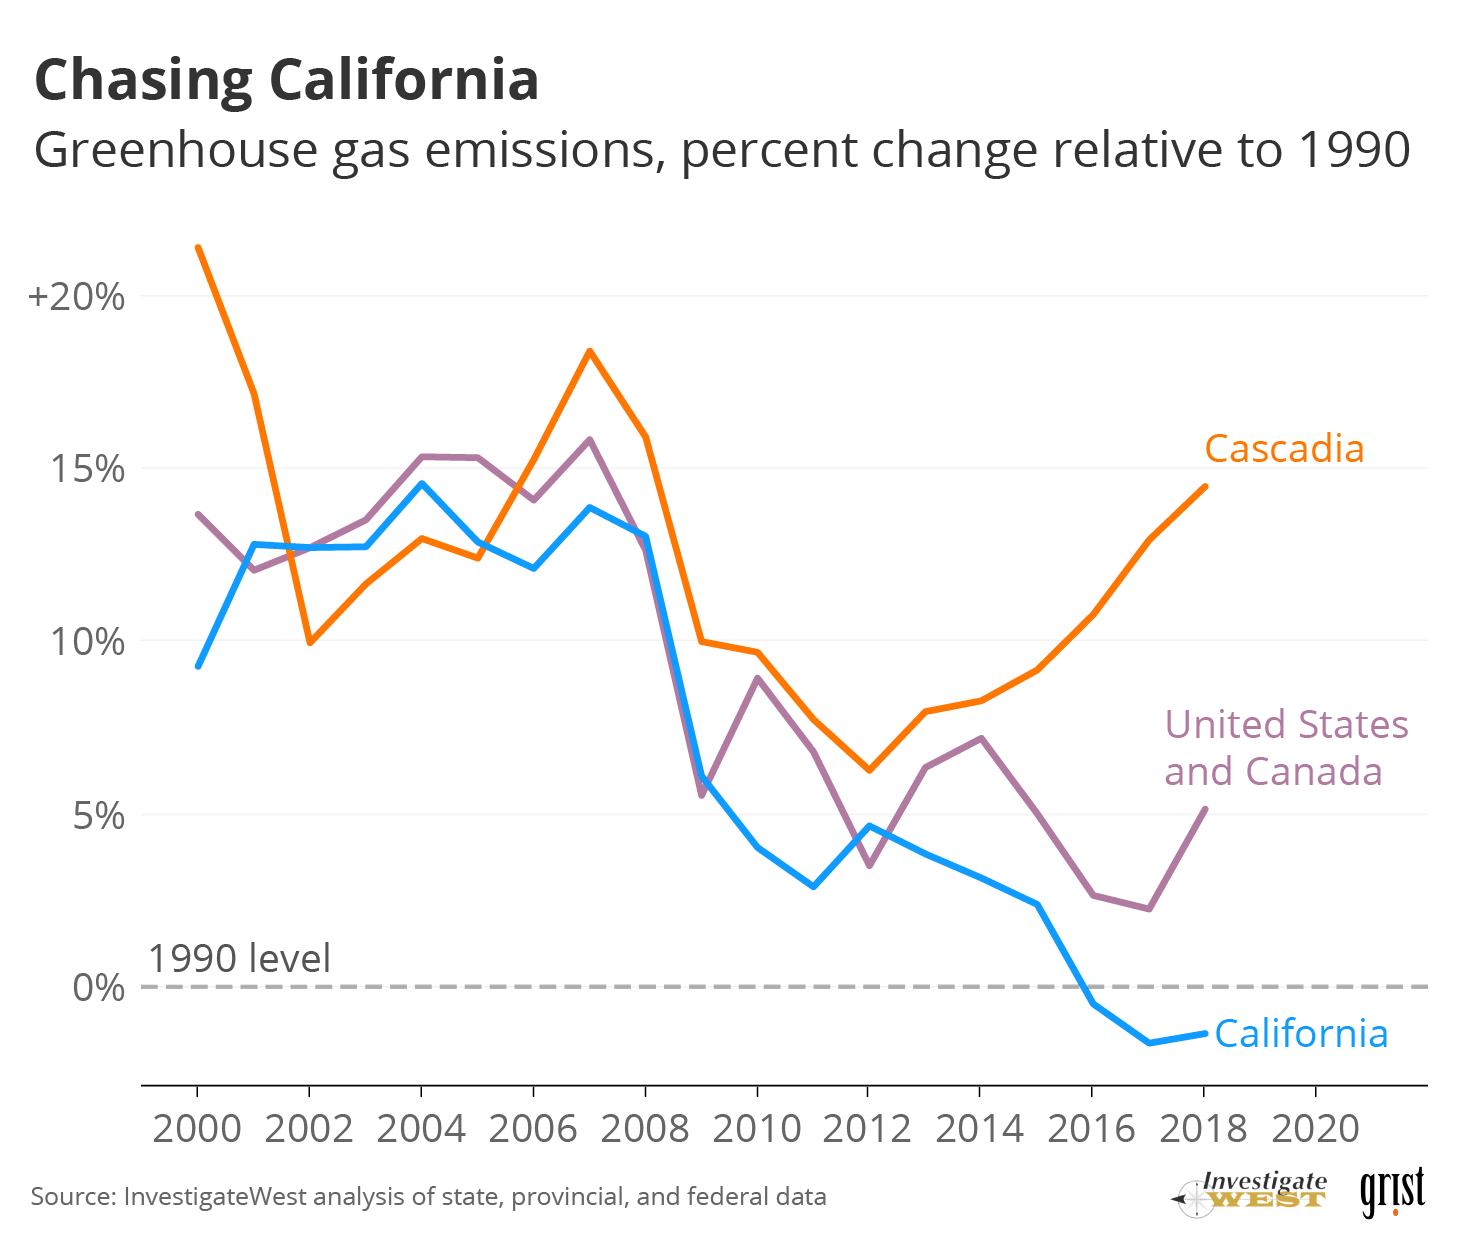 Cascadia's emissions since 1990 relative to US and Canada and California